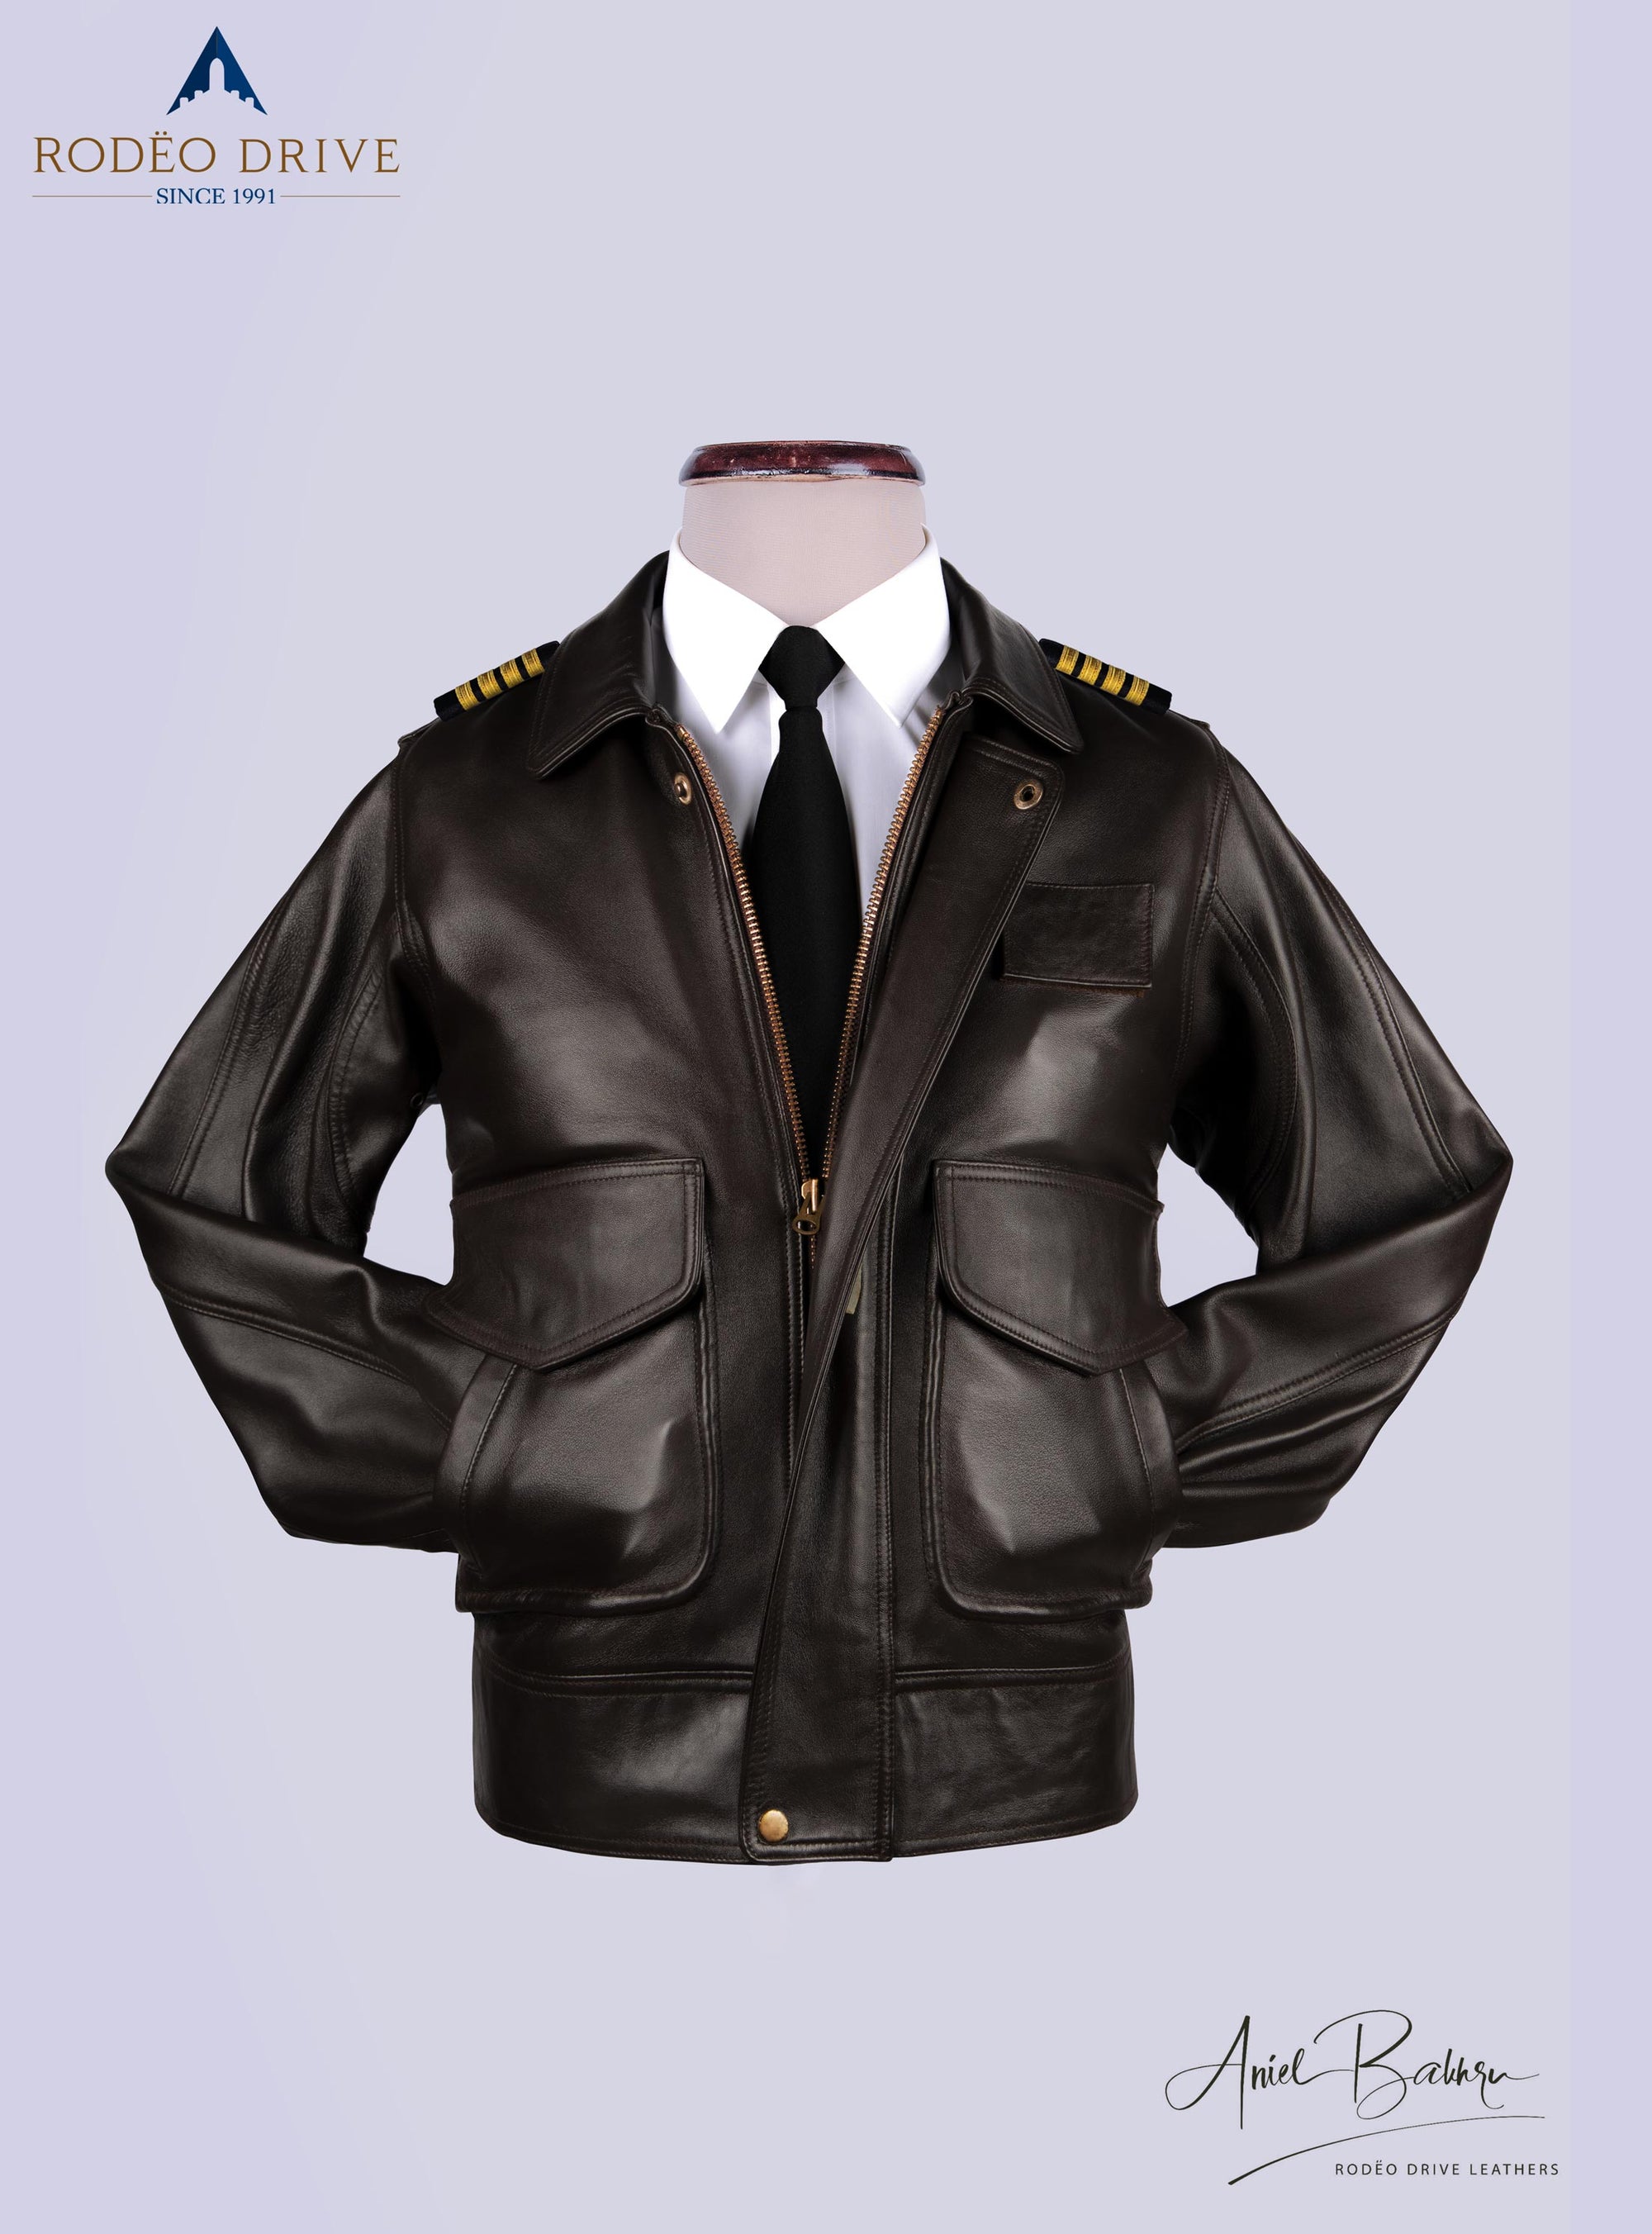 Front image  of BROWN UNIFORM LEATHER JACKETS for MEN . A white shirt is tucked within along with a neck tie